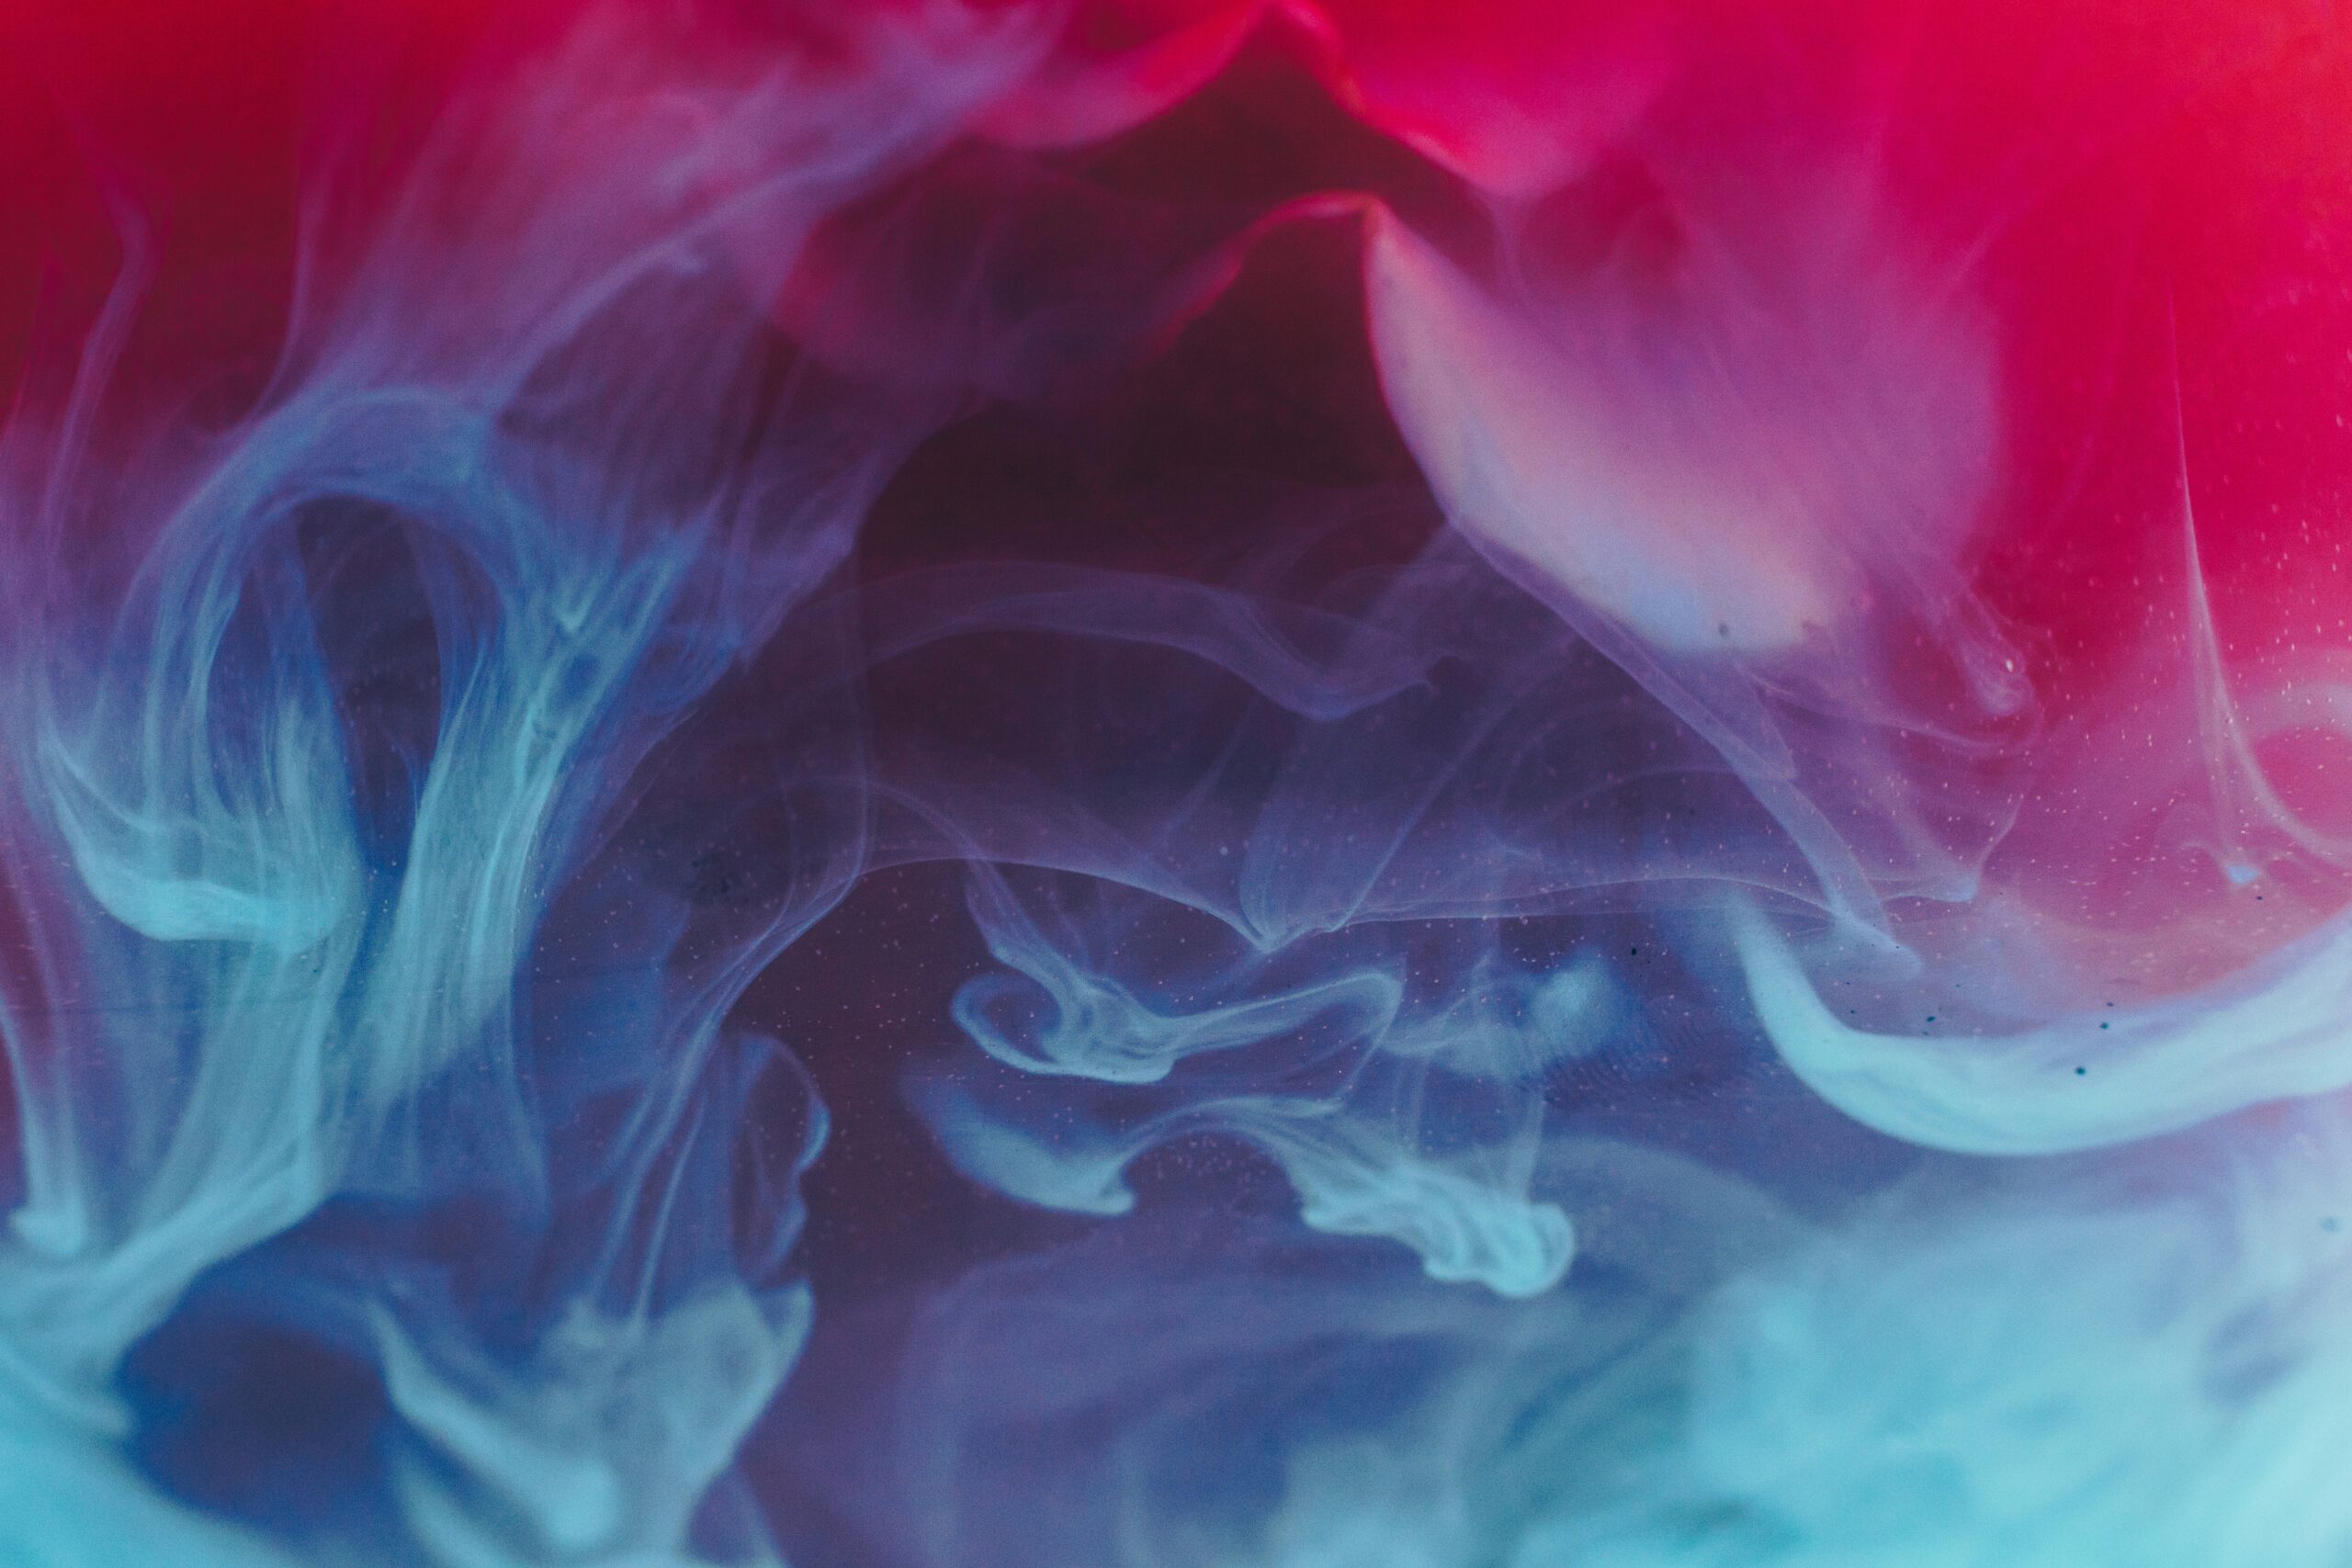 Celebrate 4/20 with a mesmerizing image of red and blue smoke swirls. The design creates an entrancing fluid pattern against a dark backdrop, perfect for promoting relaxation and awe.